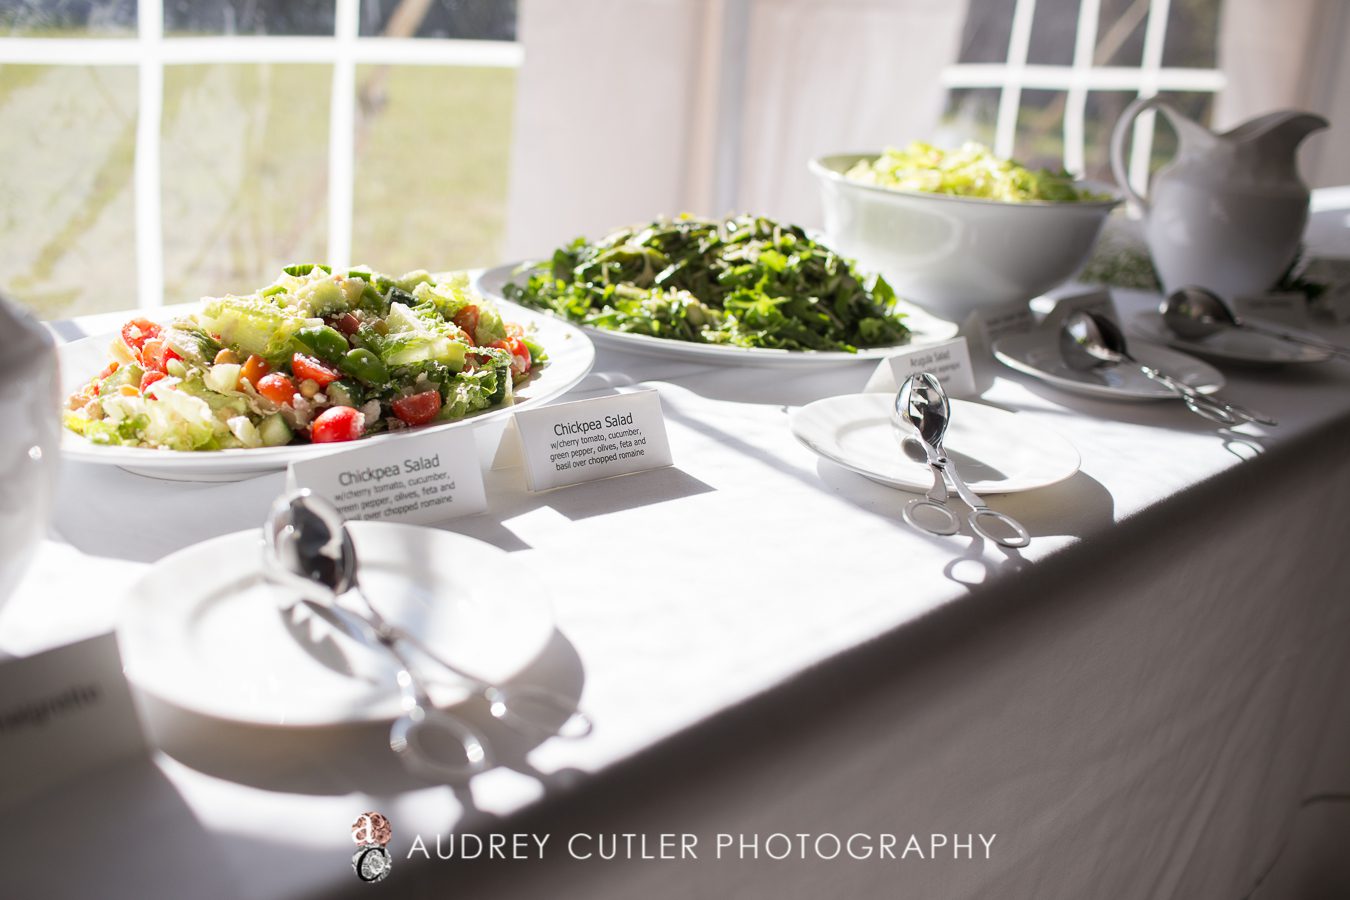 KO Catering and Pies – South Boston – Massachusetts Wedding Photographers - © Audrey Cutler Photography 2014